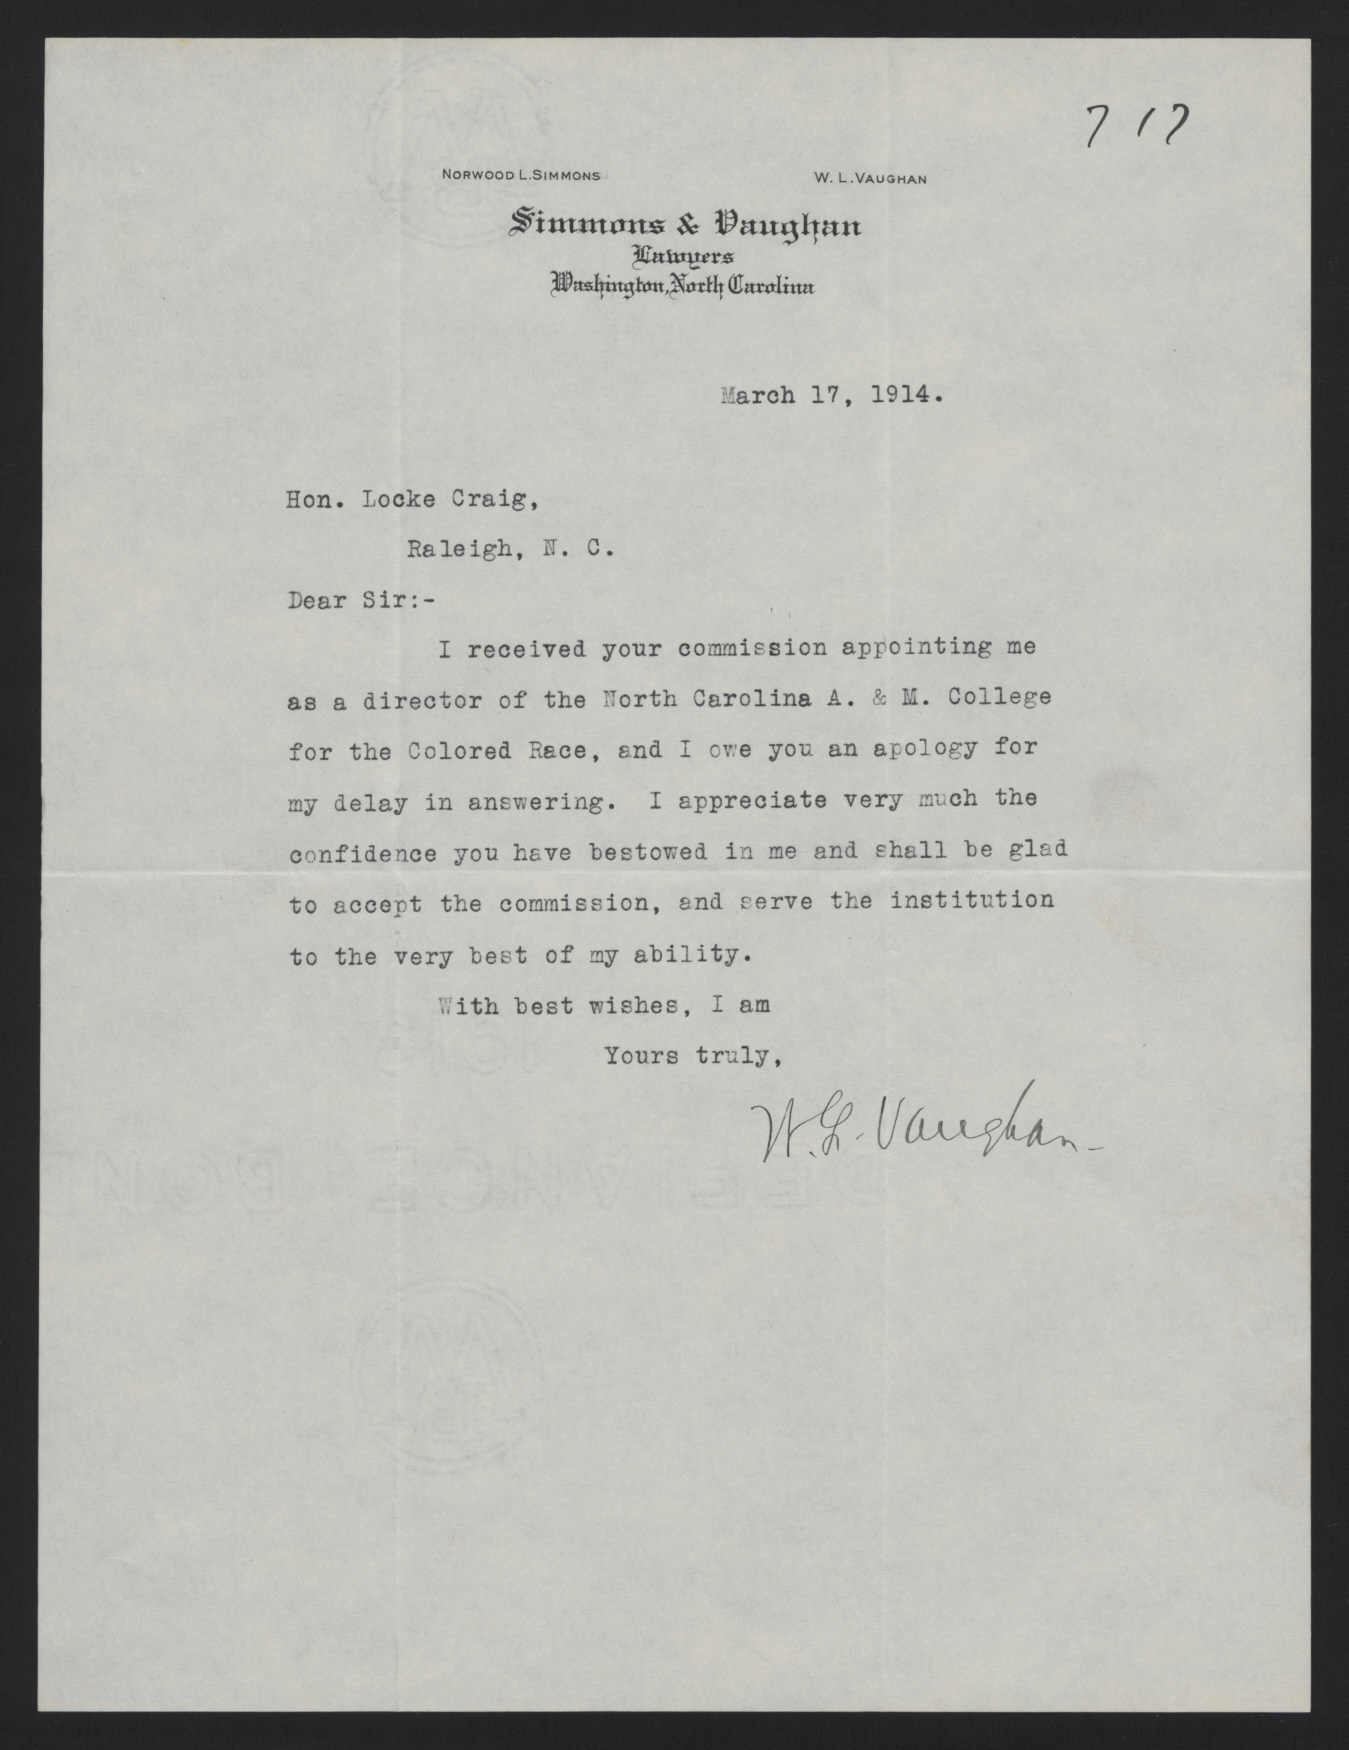 Letter from Vaughan to Craig, March 17, 1914